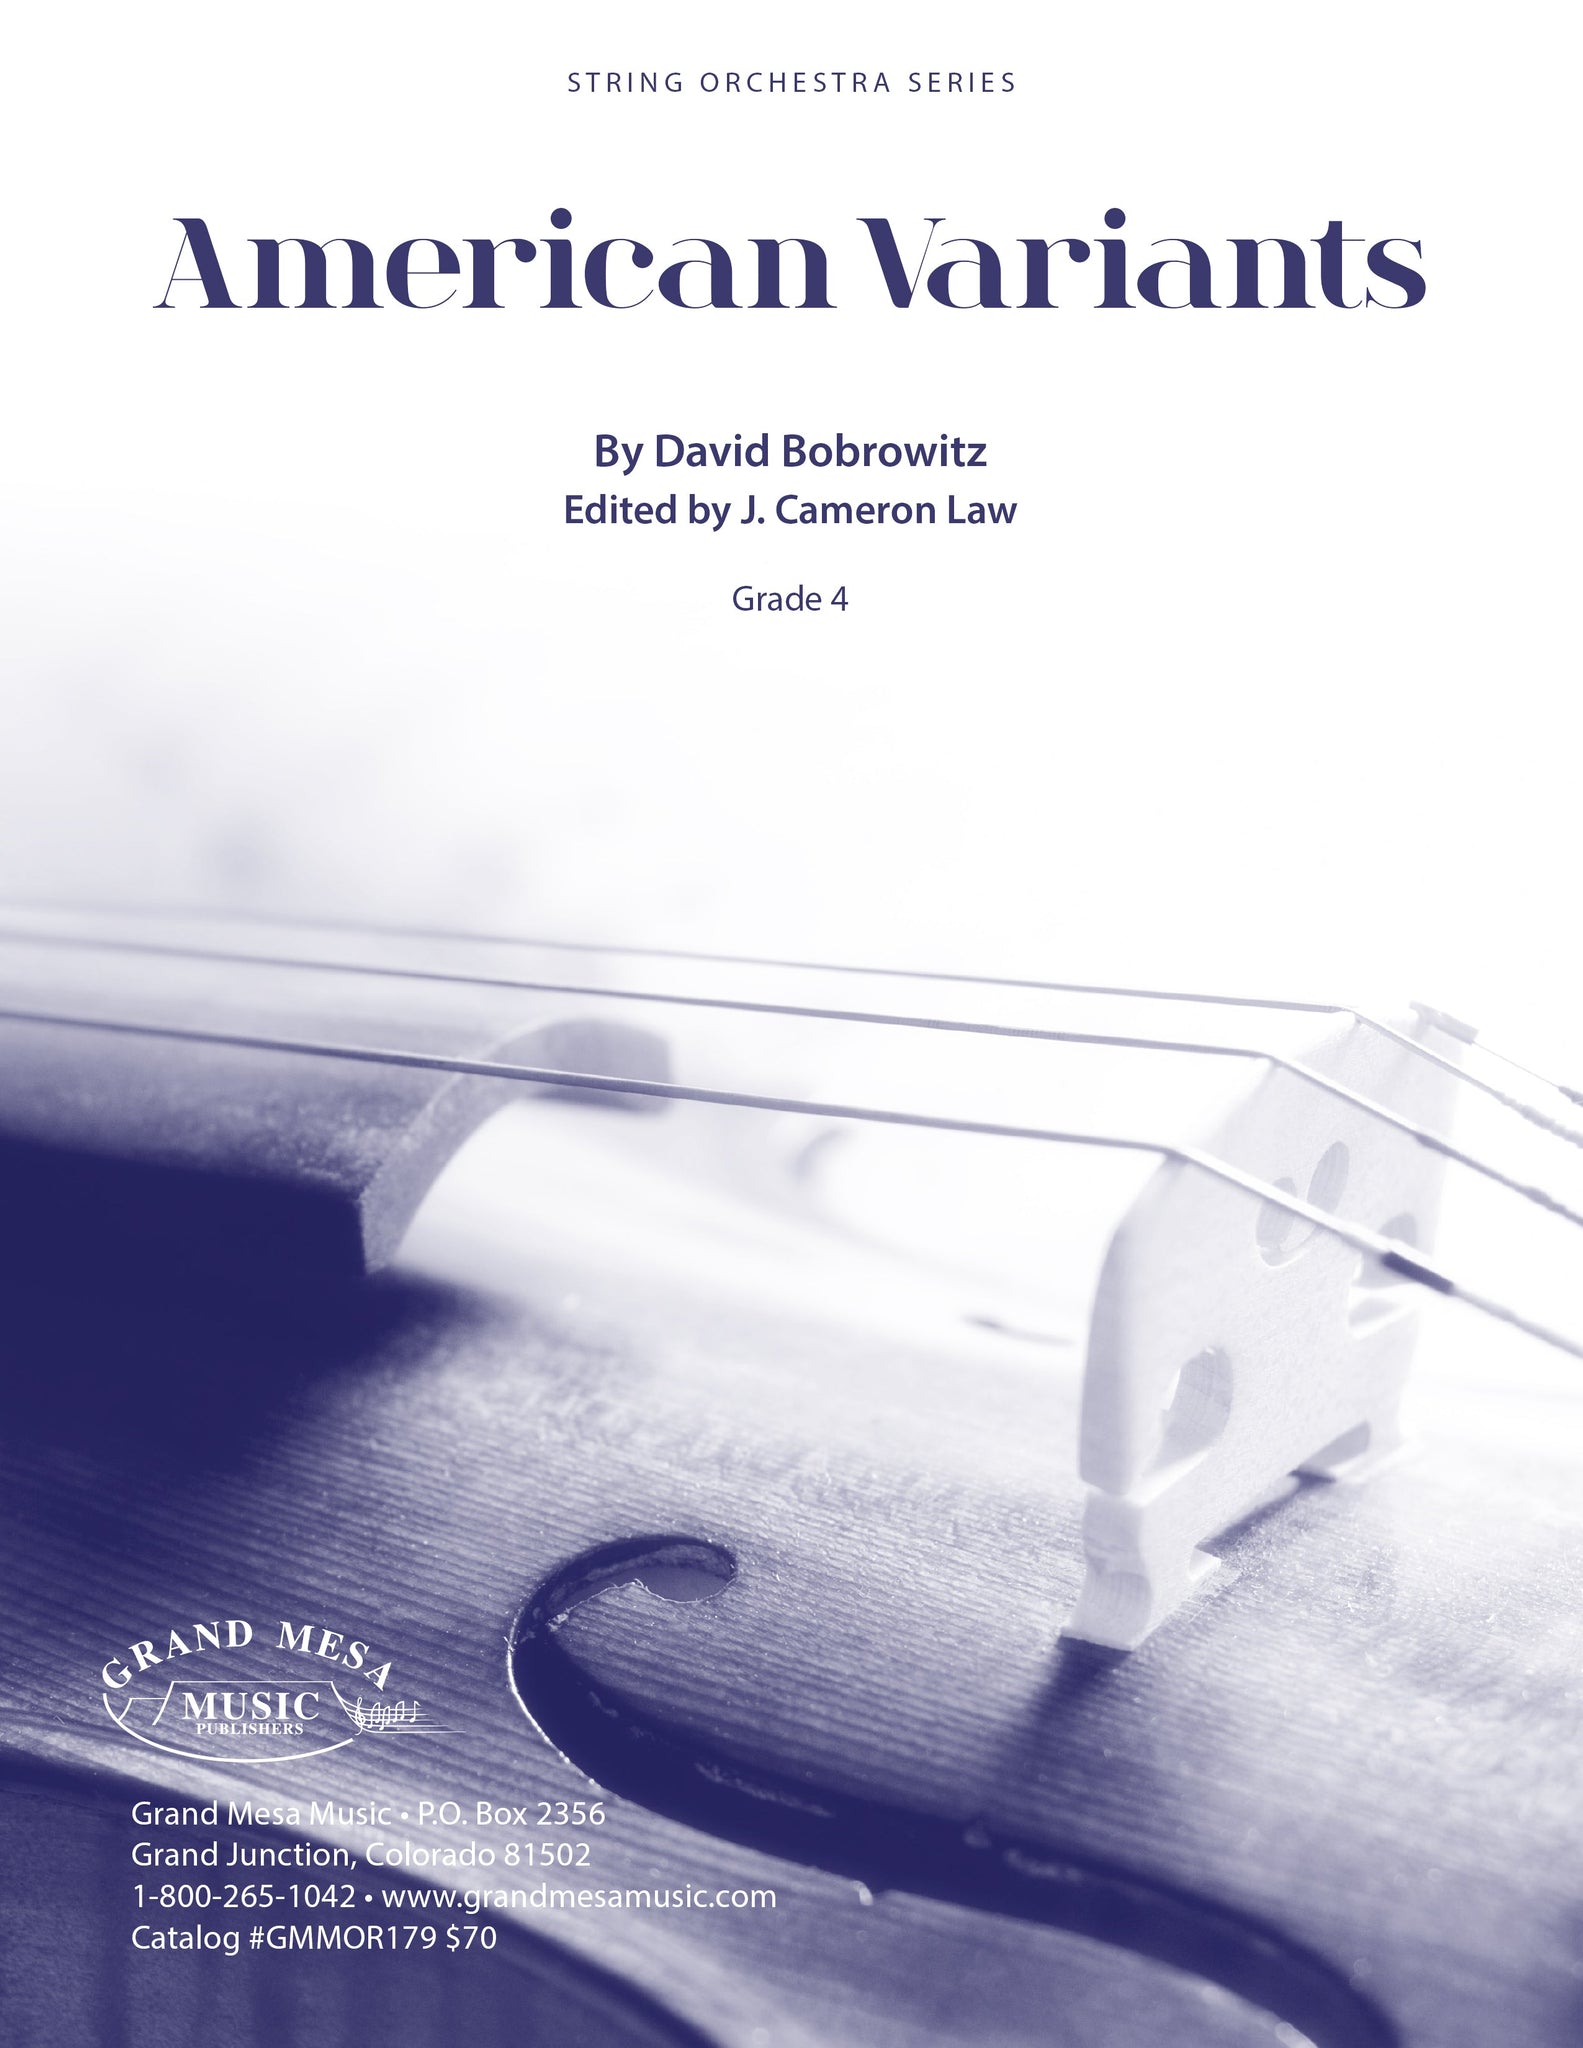 Strings sheet music cover of American Variants, composed by David Bobrowitz.